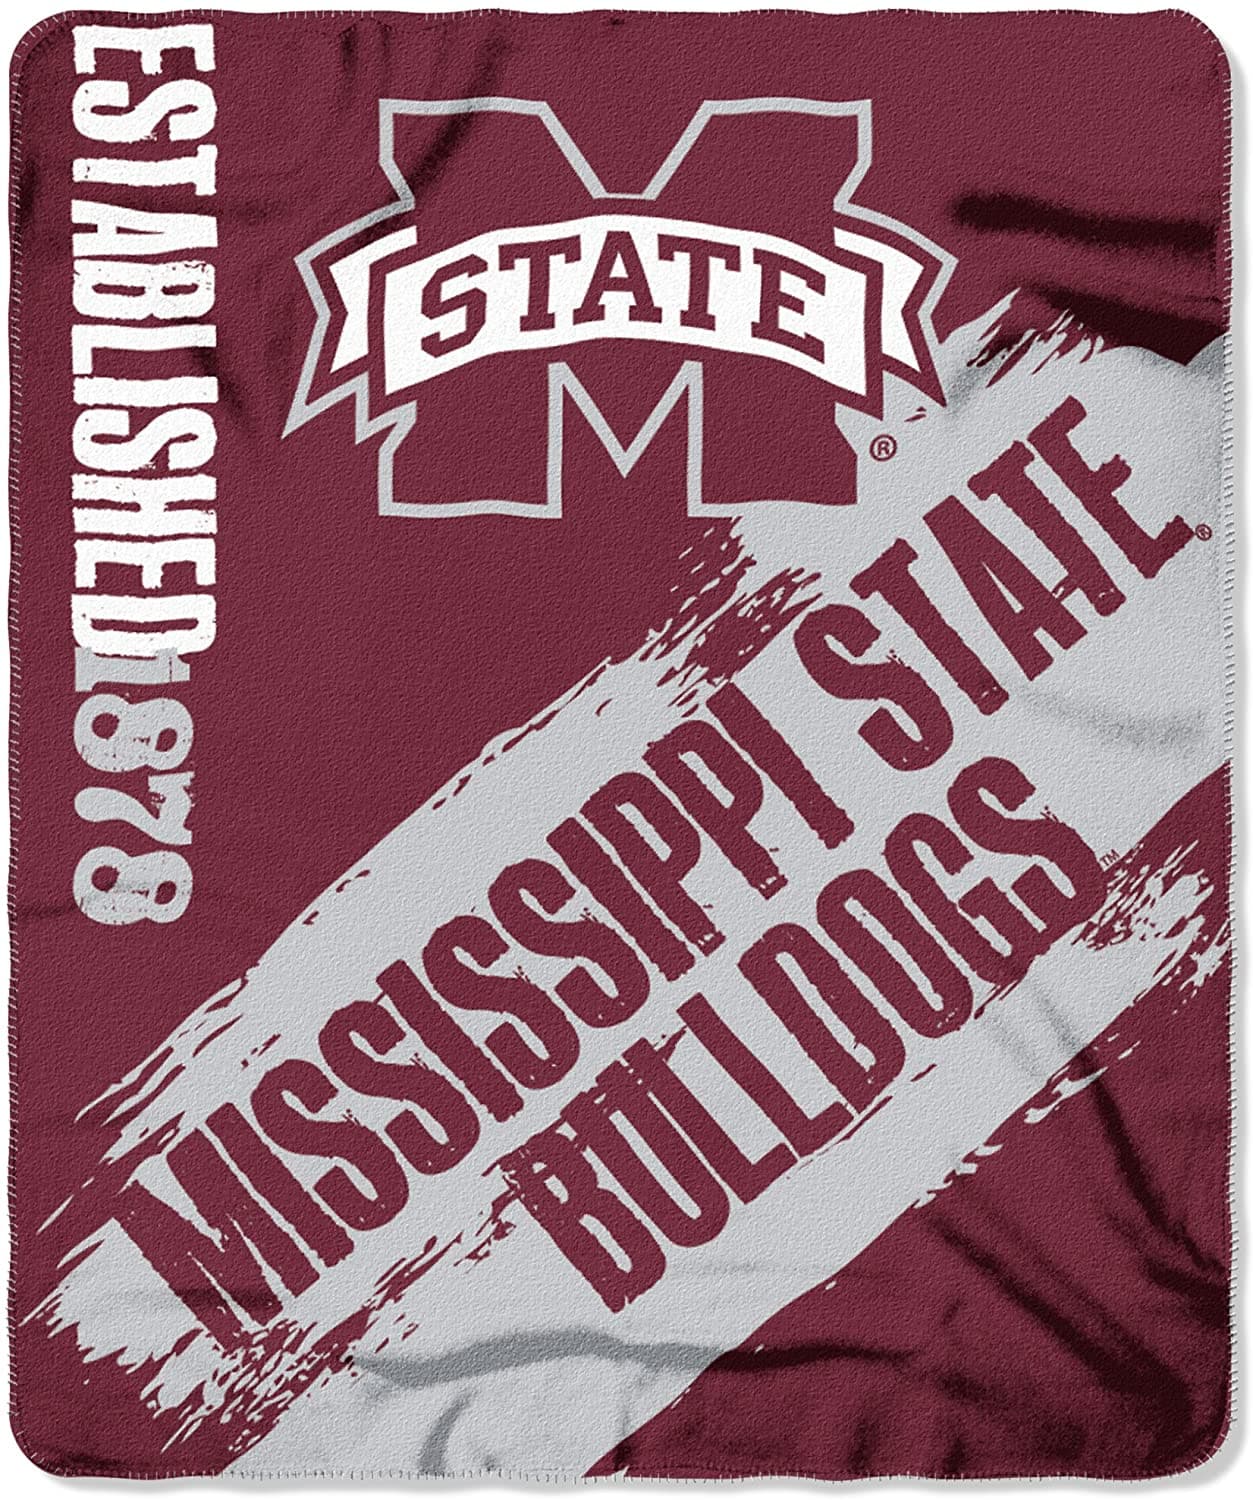 Officially Licensed Ncaa Printed Throw Mississippi State Bulldogs Fleece Blanket